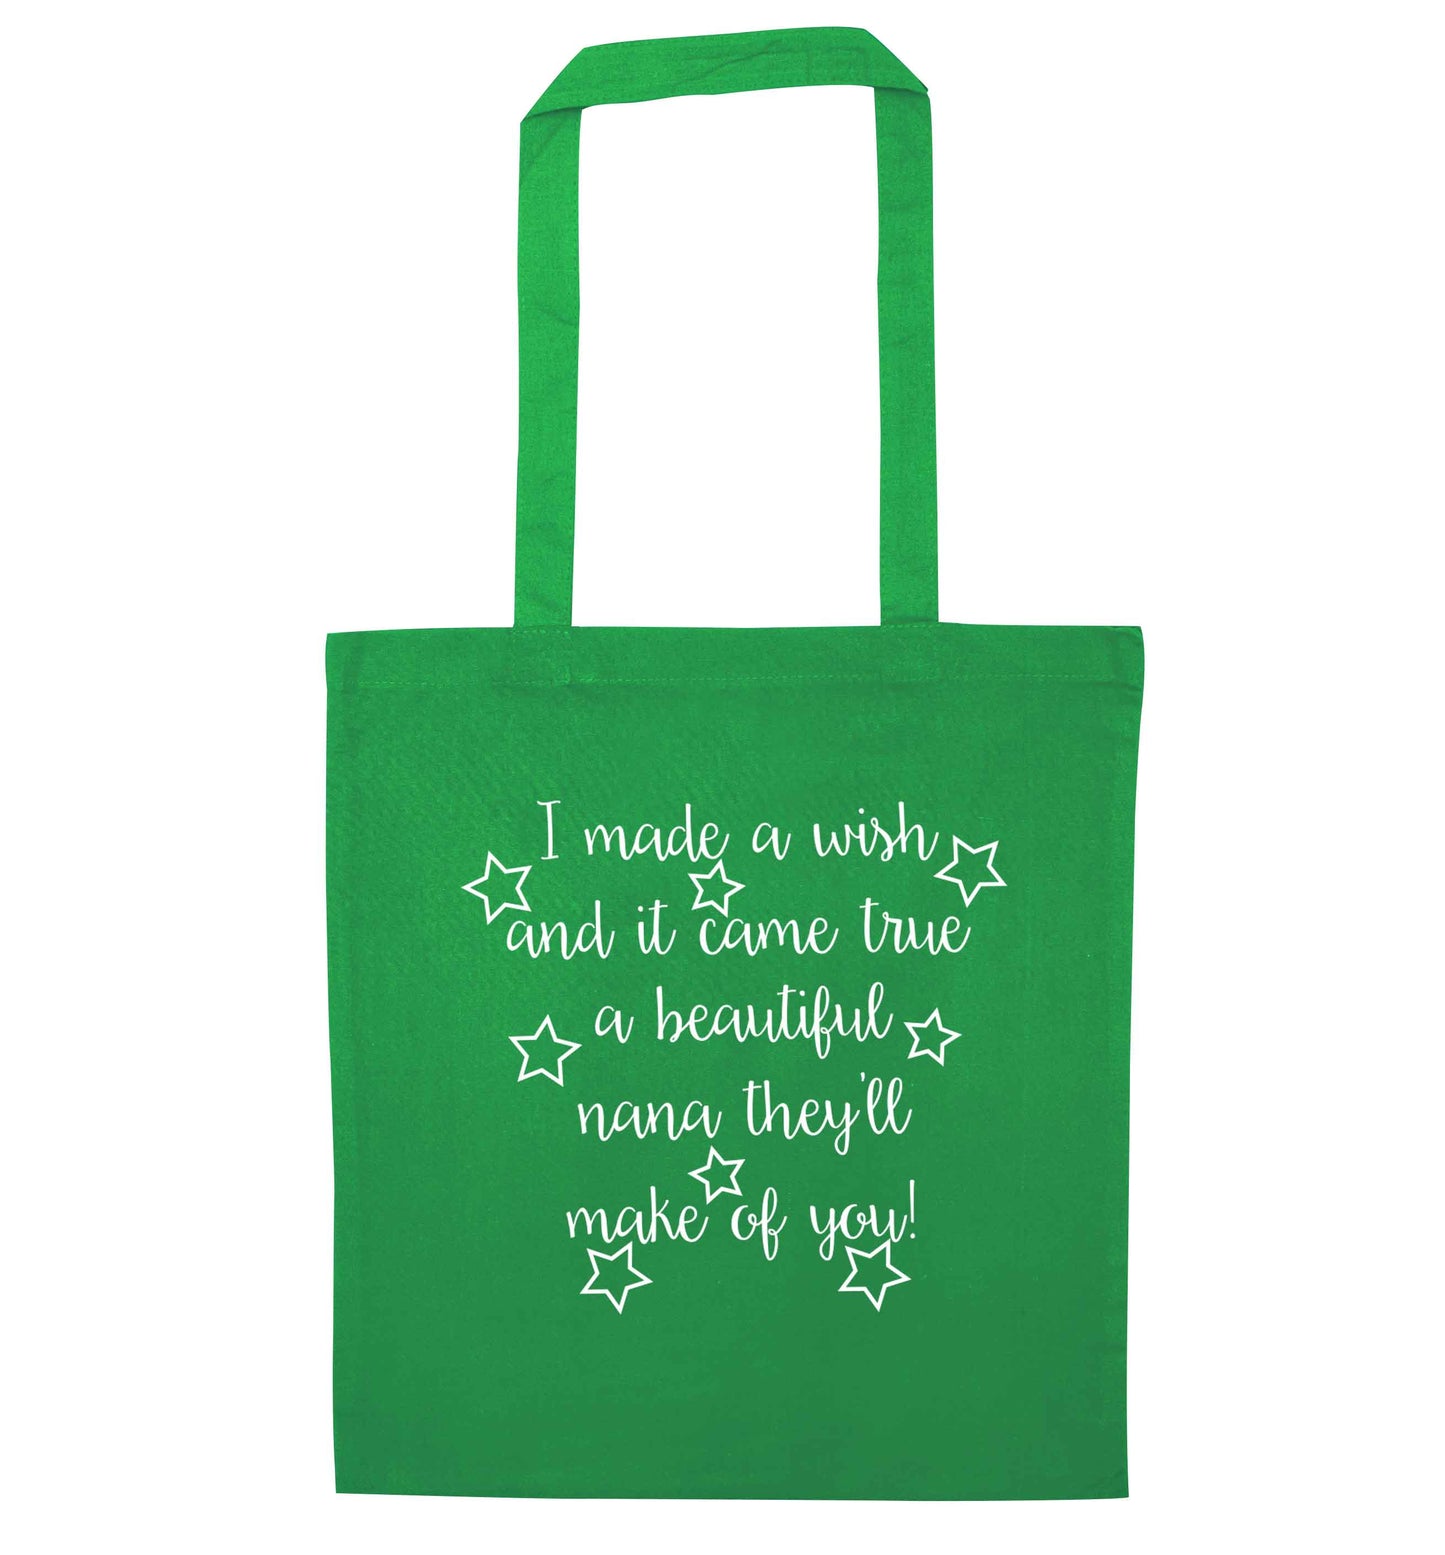 I made a wish and it came true a beautiful nana they'll make of you! green tote bag